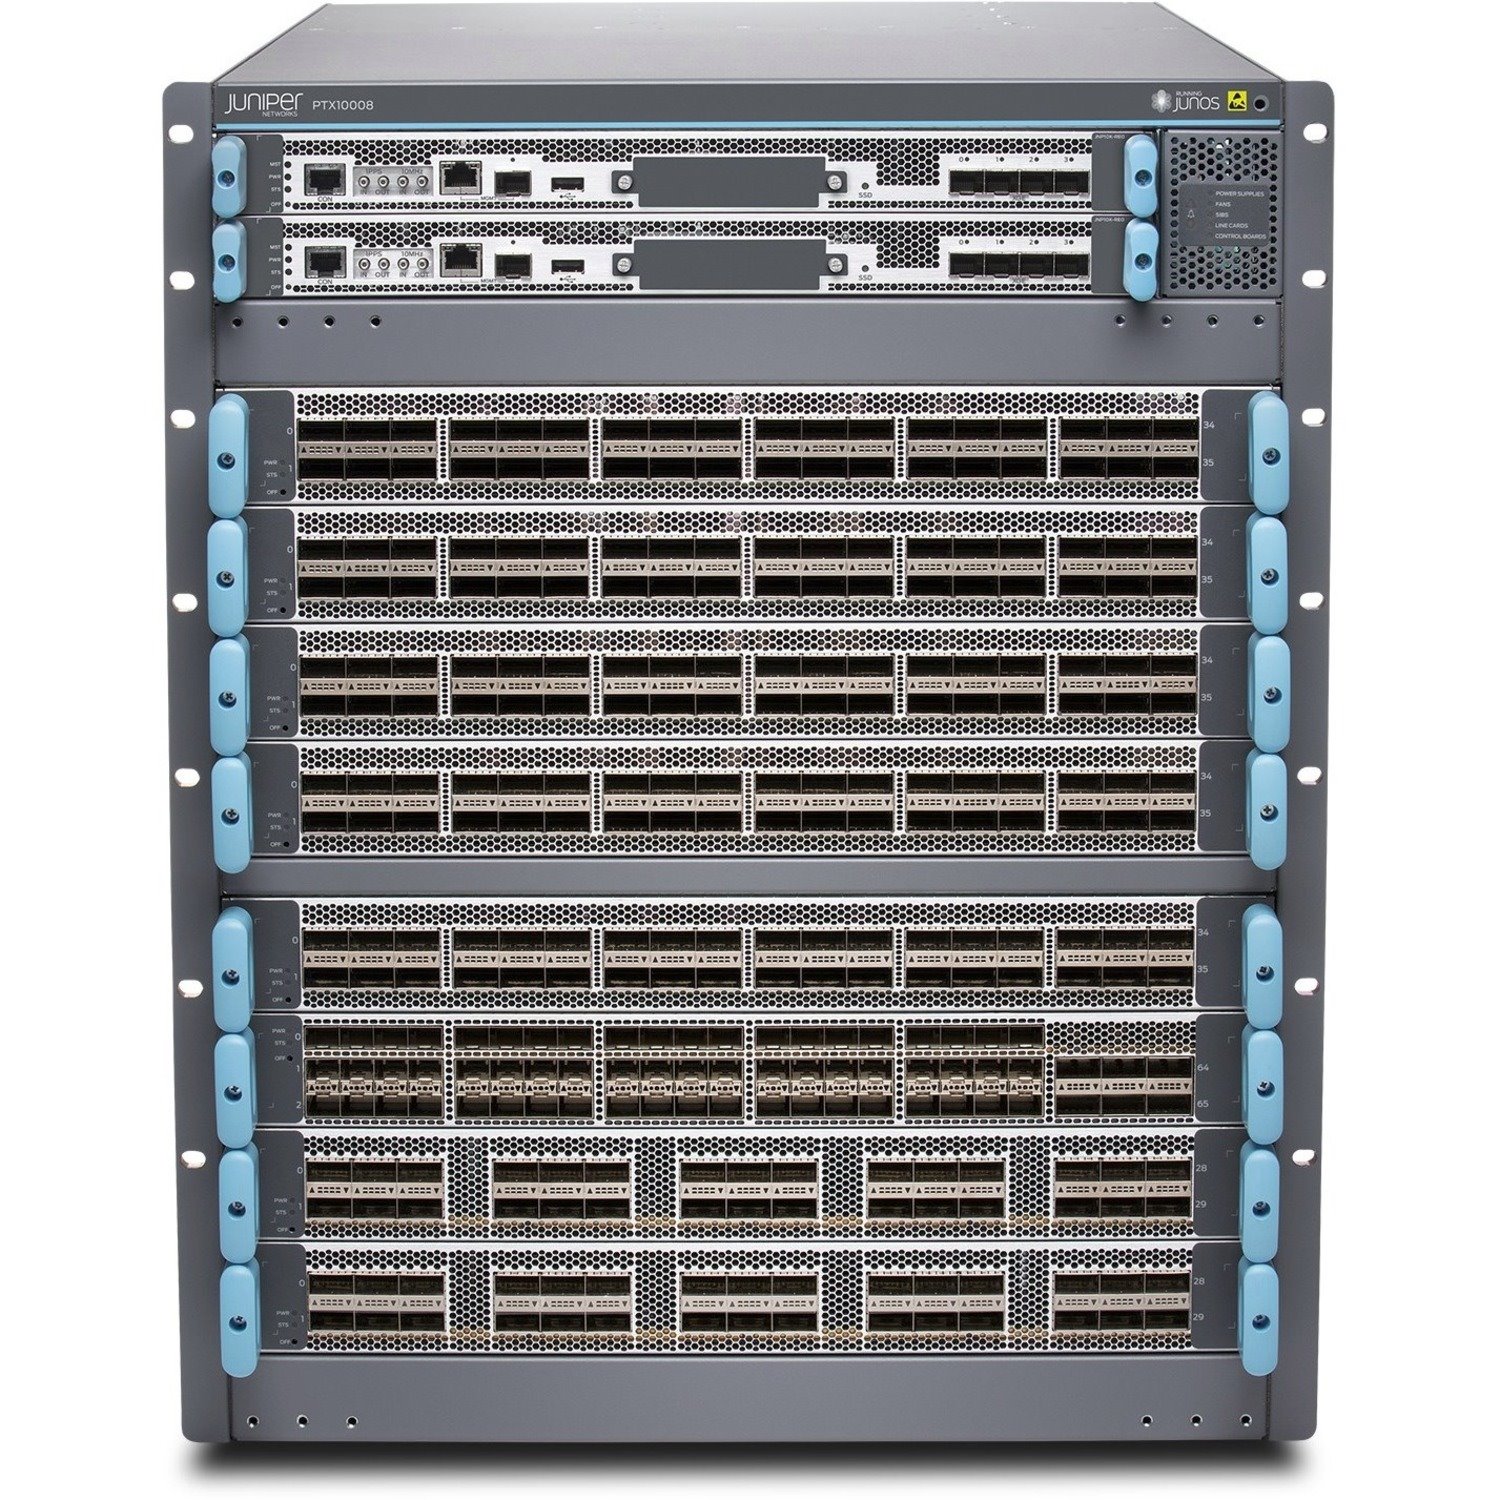 Juniper PTX10000 PTX10016 Router Chassis